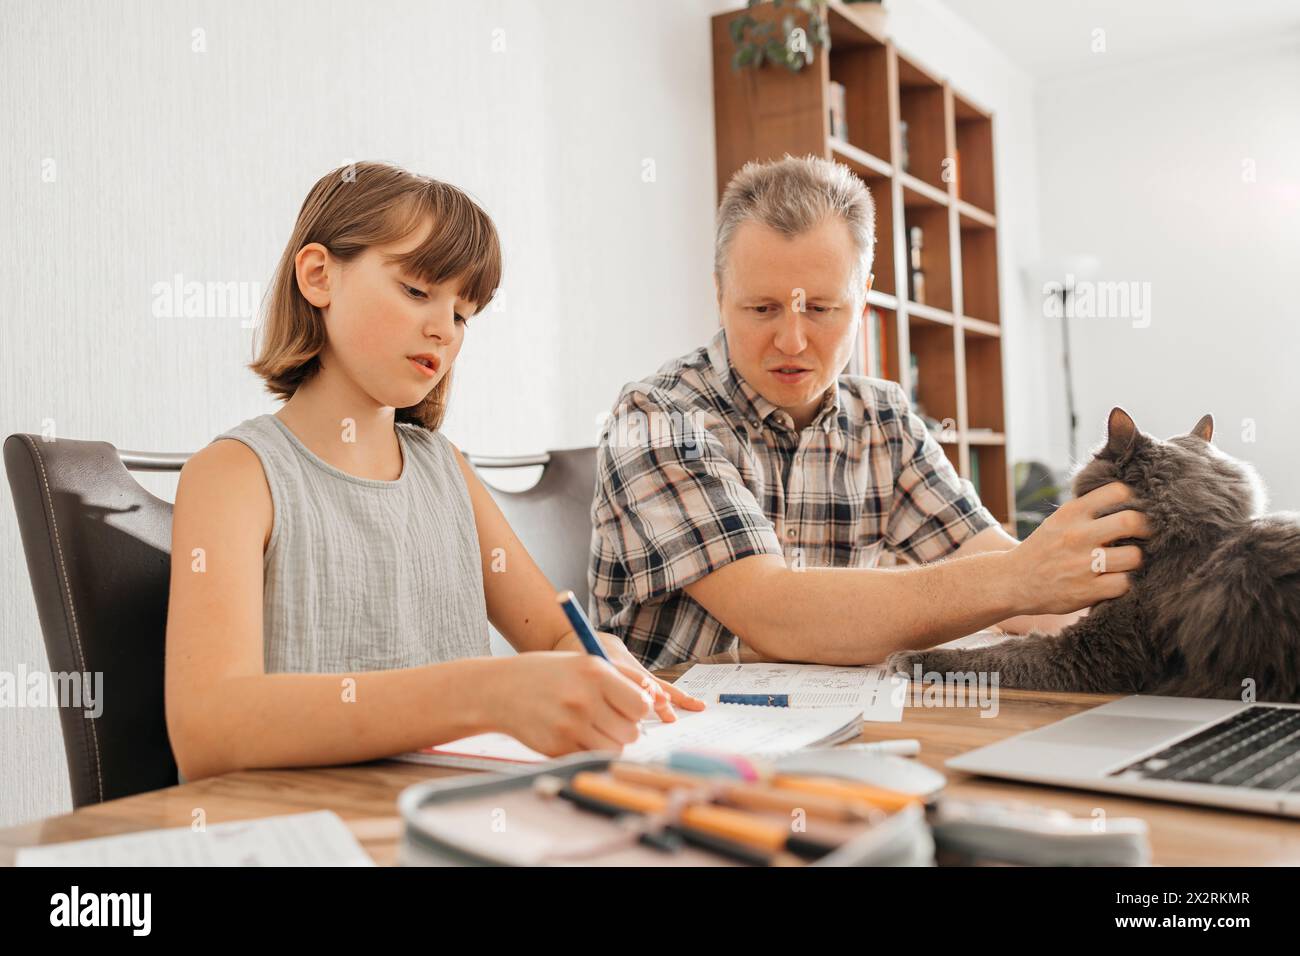 Man petting cat and helping daughter doing homework at home Stock Photo